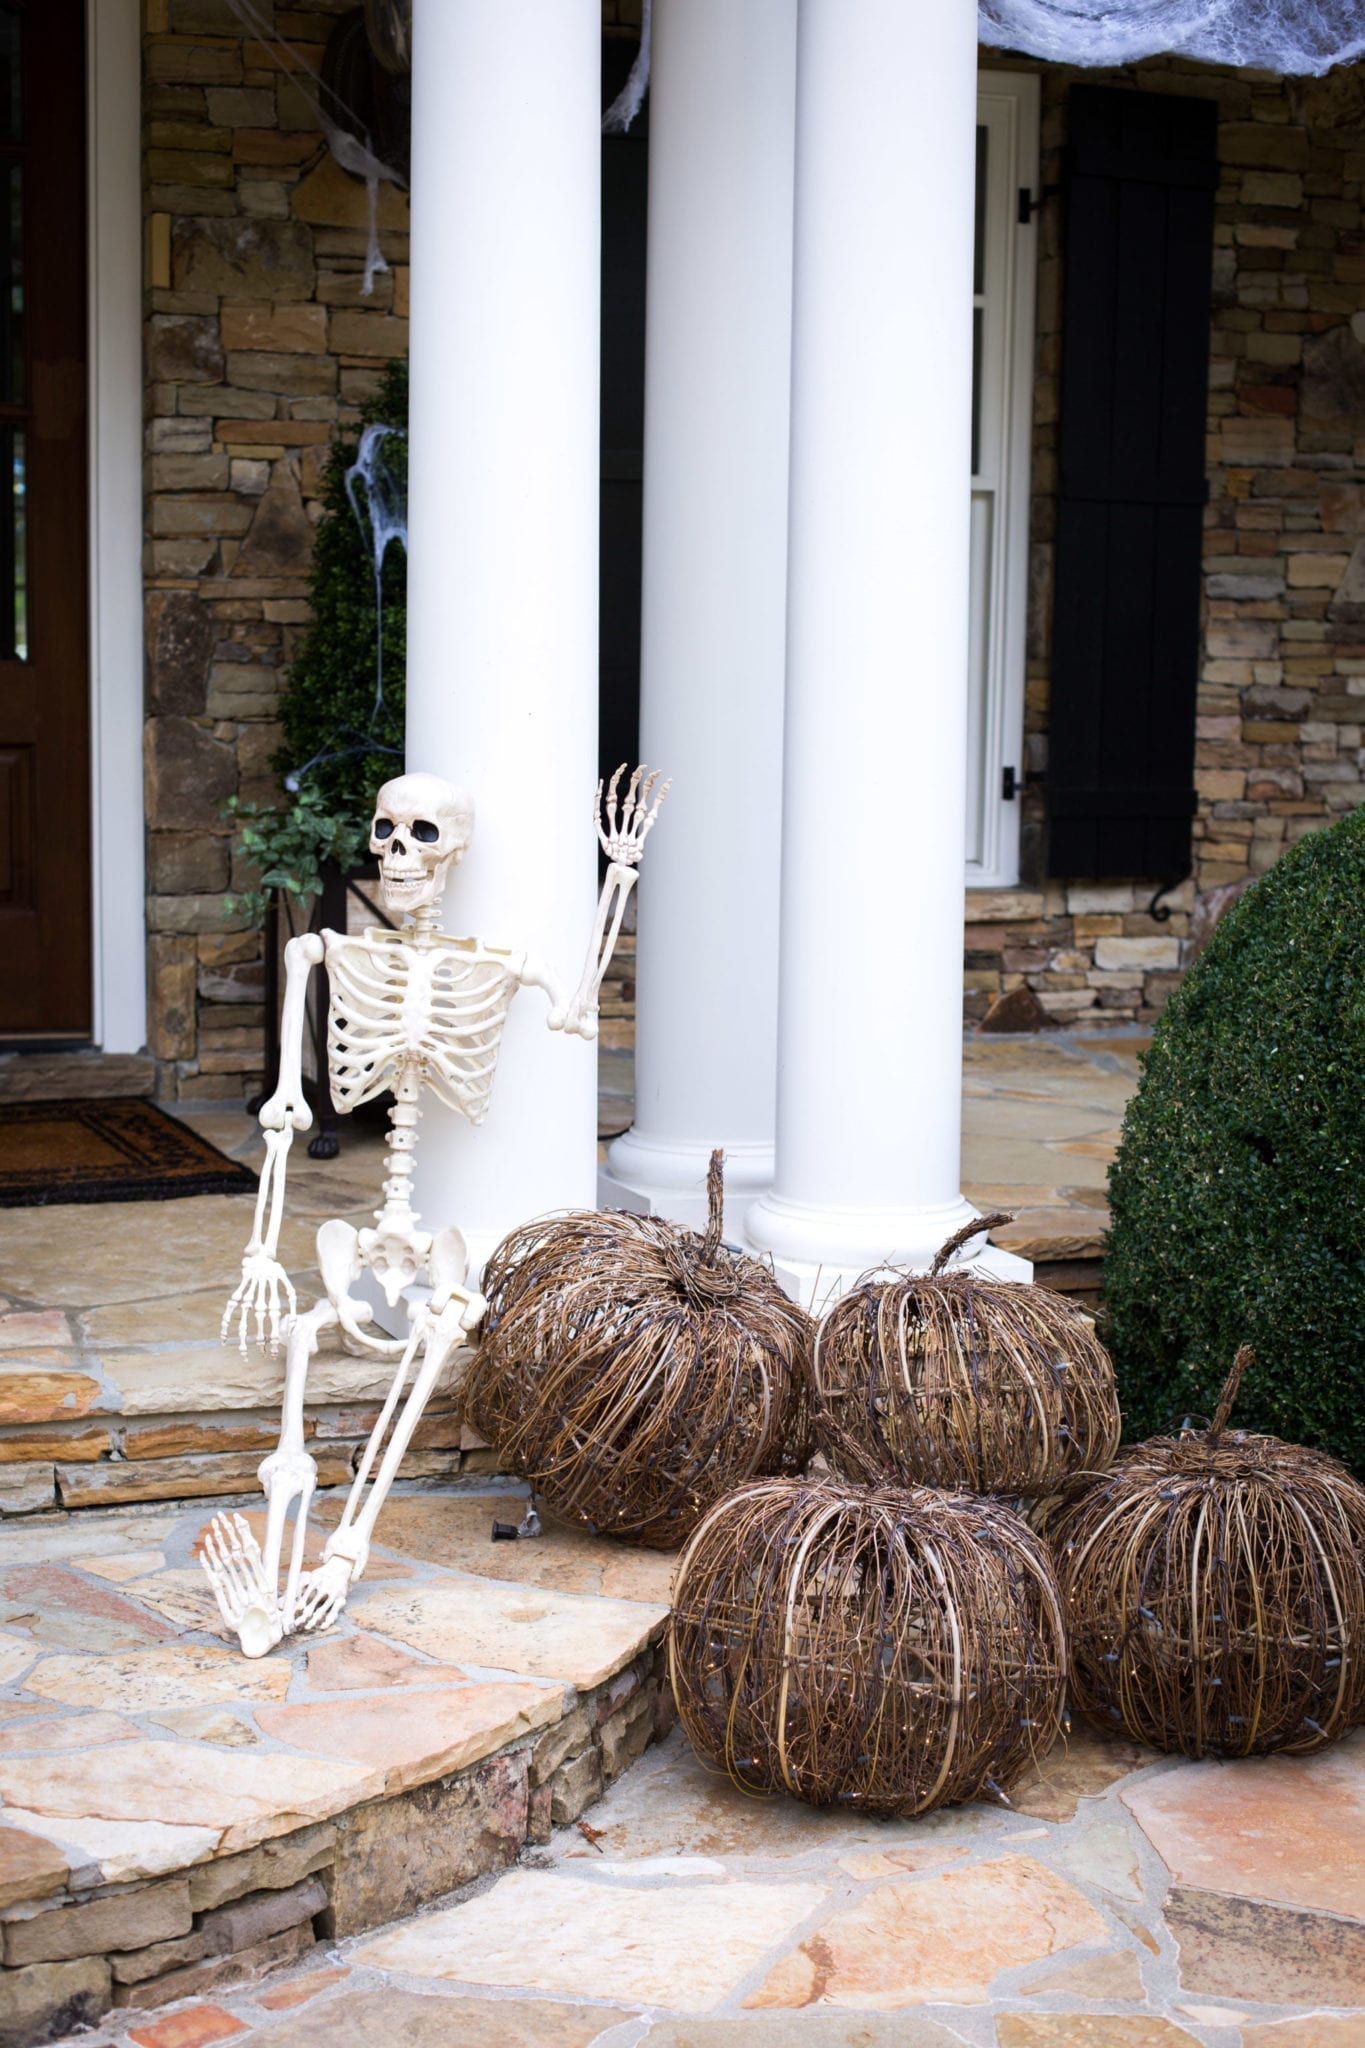 Decorating outside your house for Halloween.